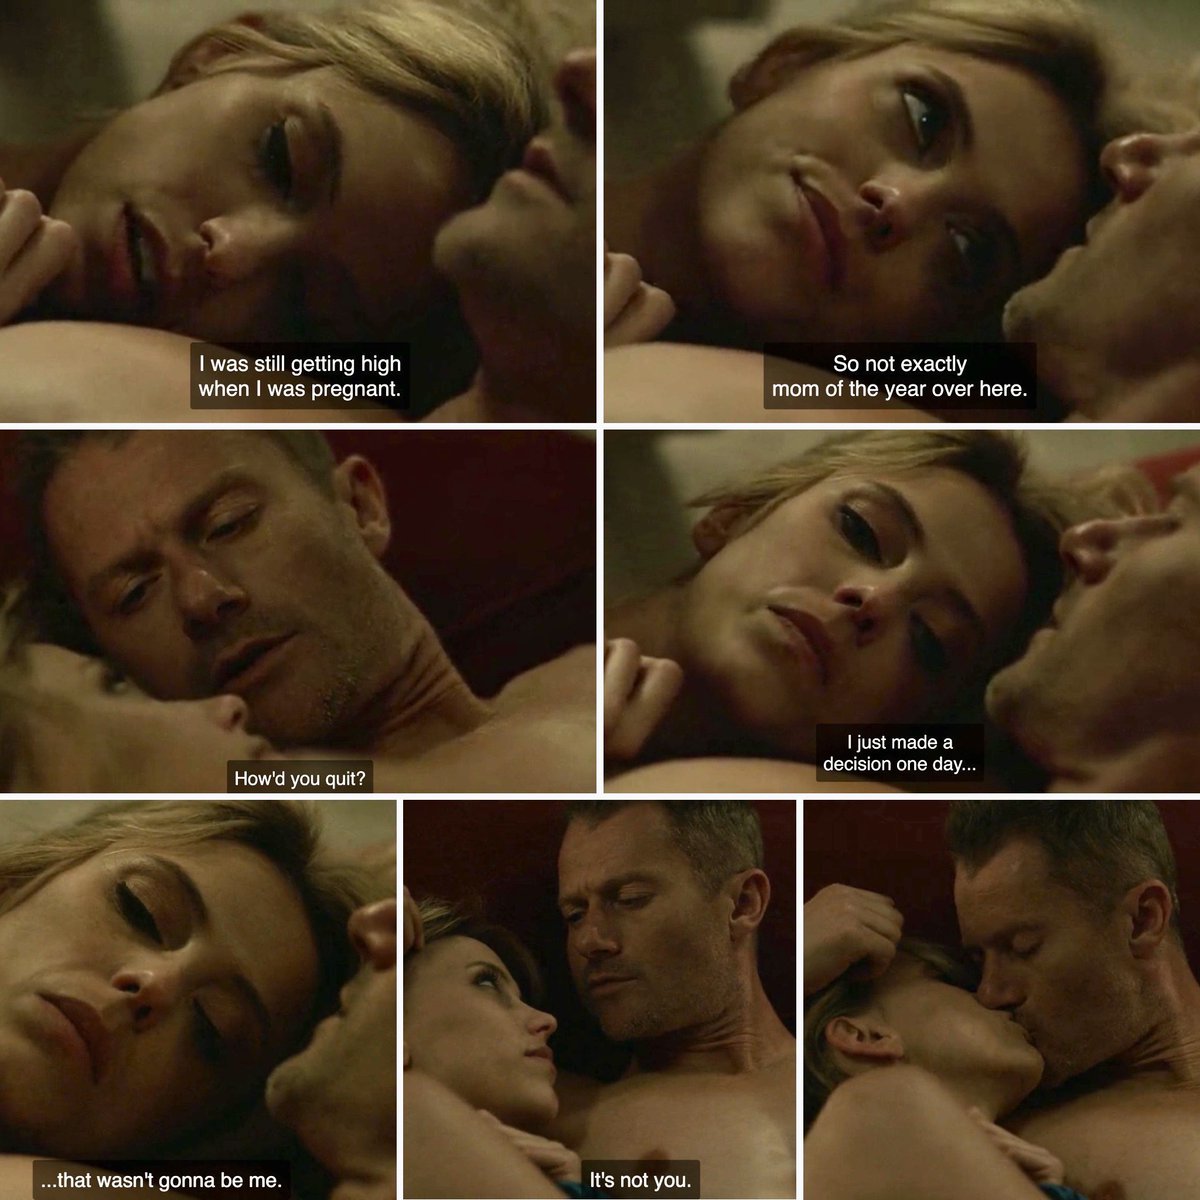 Ray and Renee have a heart to heart about their pasts 💞

#Hightown #STARZ #HeartToHeart #AfterSex #PillowTalk #LayingInEachOthersArms #RayAndRenee #RayNee #ReneeSegna #RayAbruzzo #RileyVoelkel #JamesBadgeDale